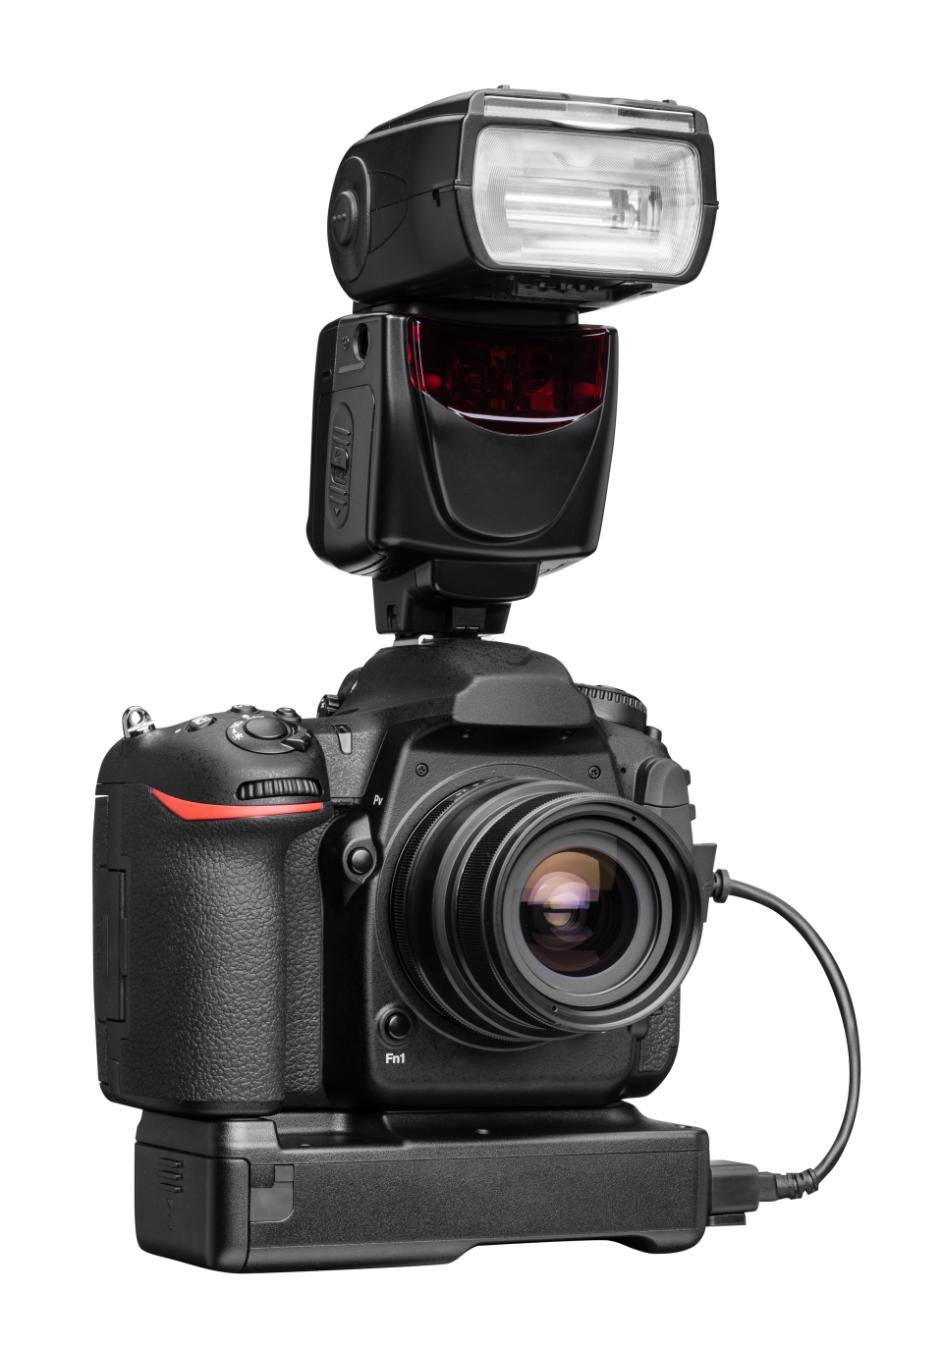 DSLR camera with light attachment used in ARGUS optical form system to create 3D positioning measurements in six degrees of freedom